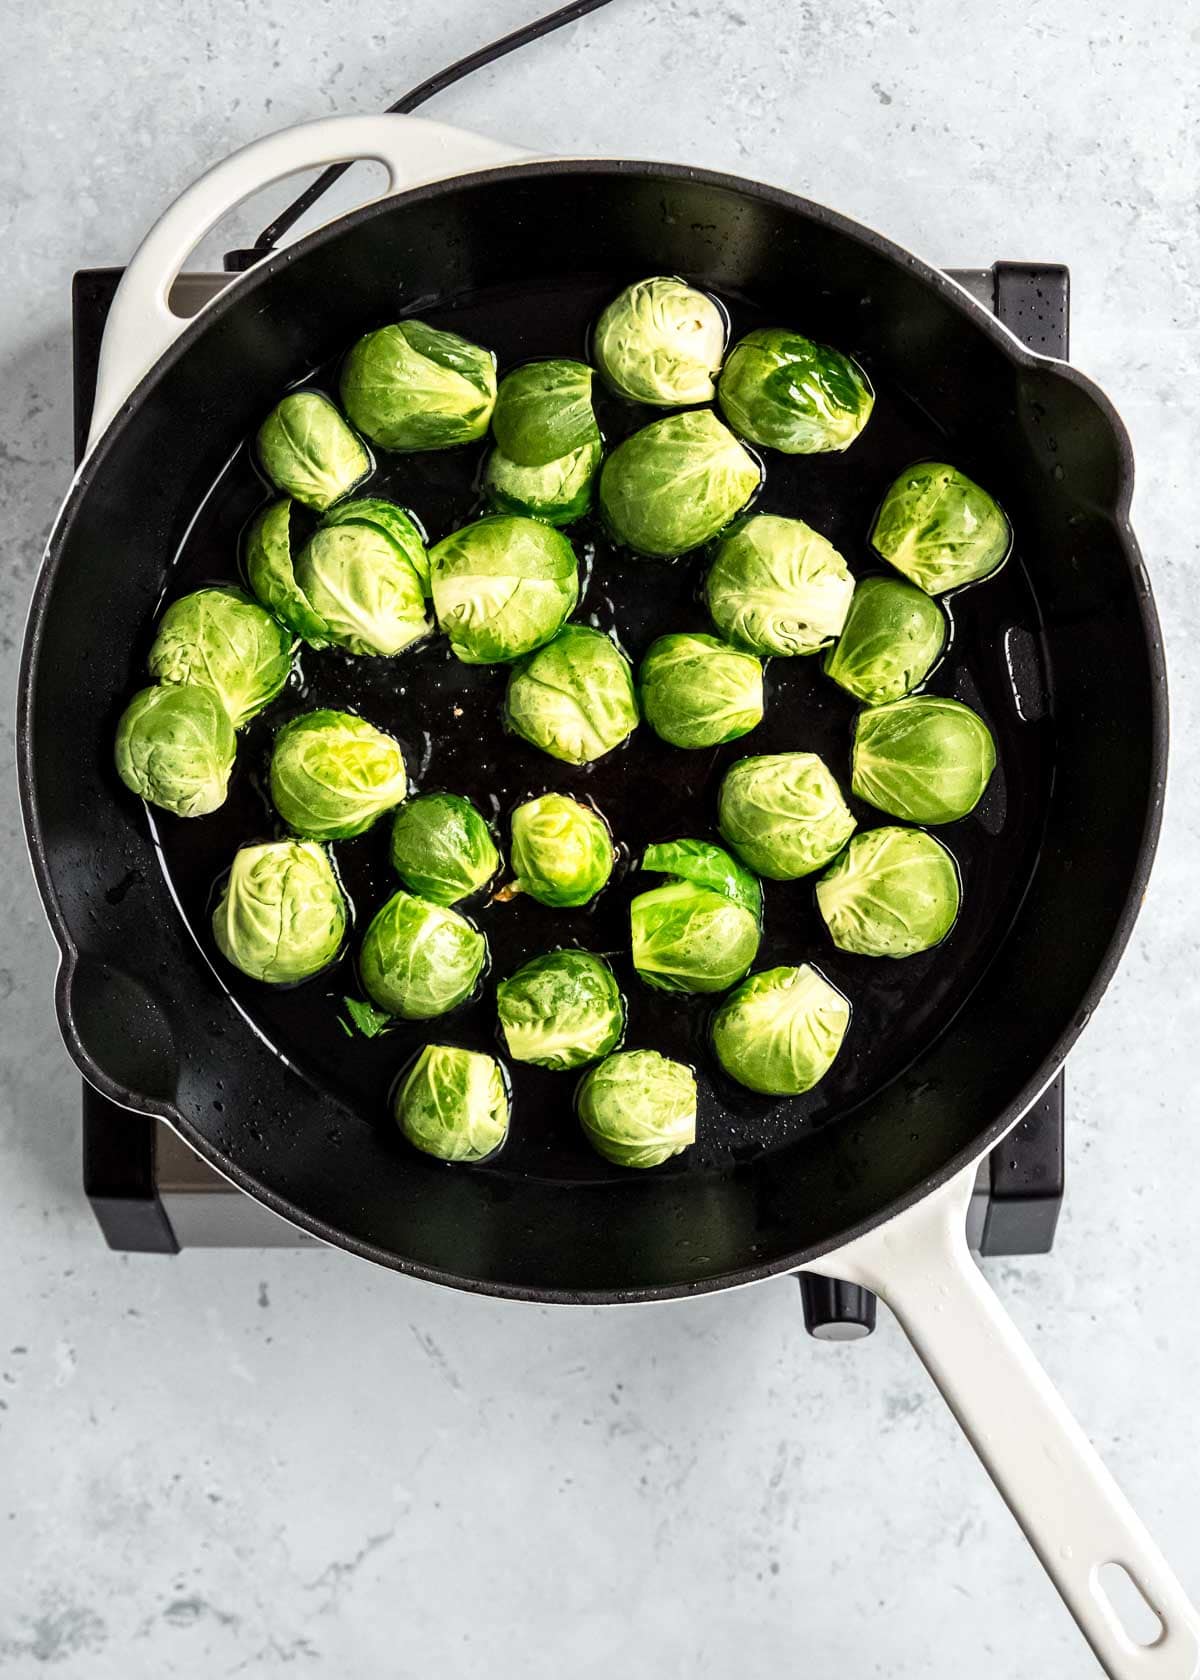 brussels sprouts cooking in a single layer, cut side down